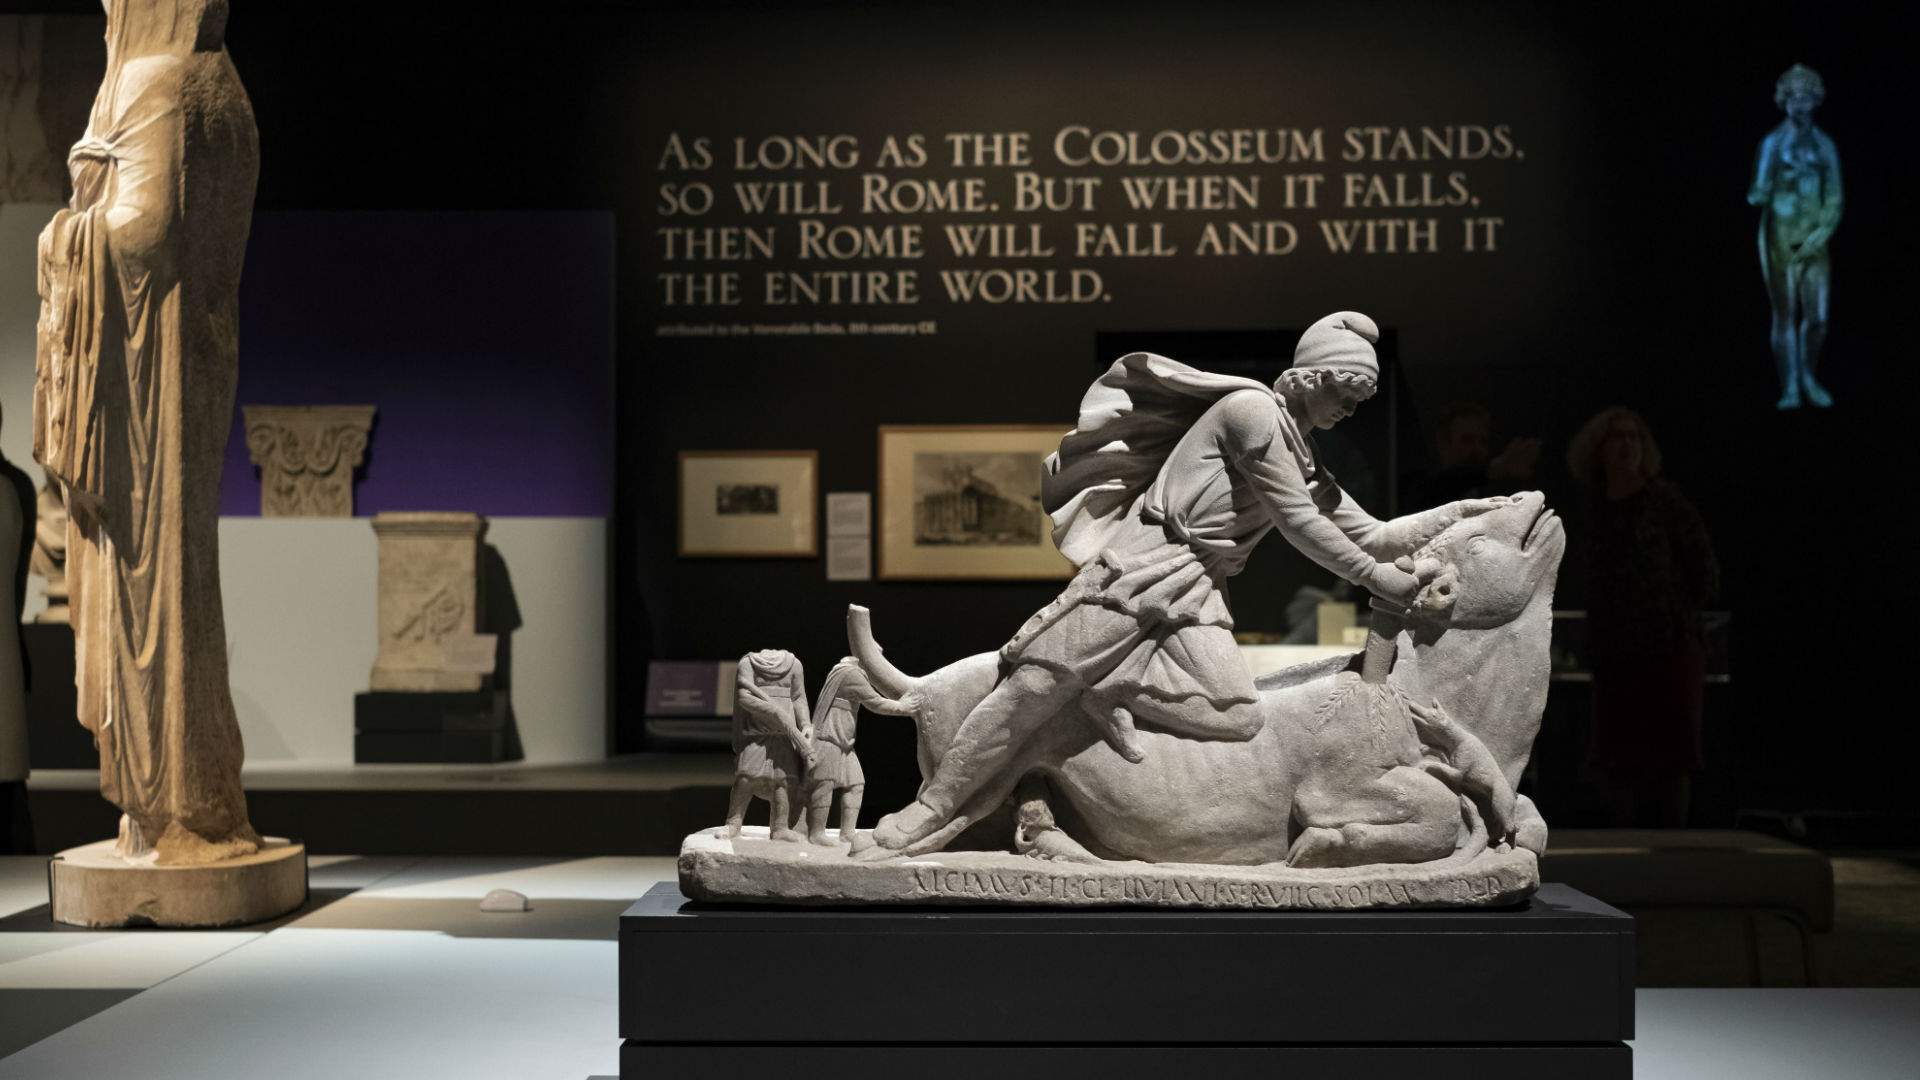 Five MustSee Objects from the 'Rome City and Empire' Exhibition